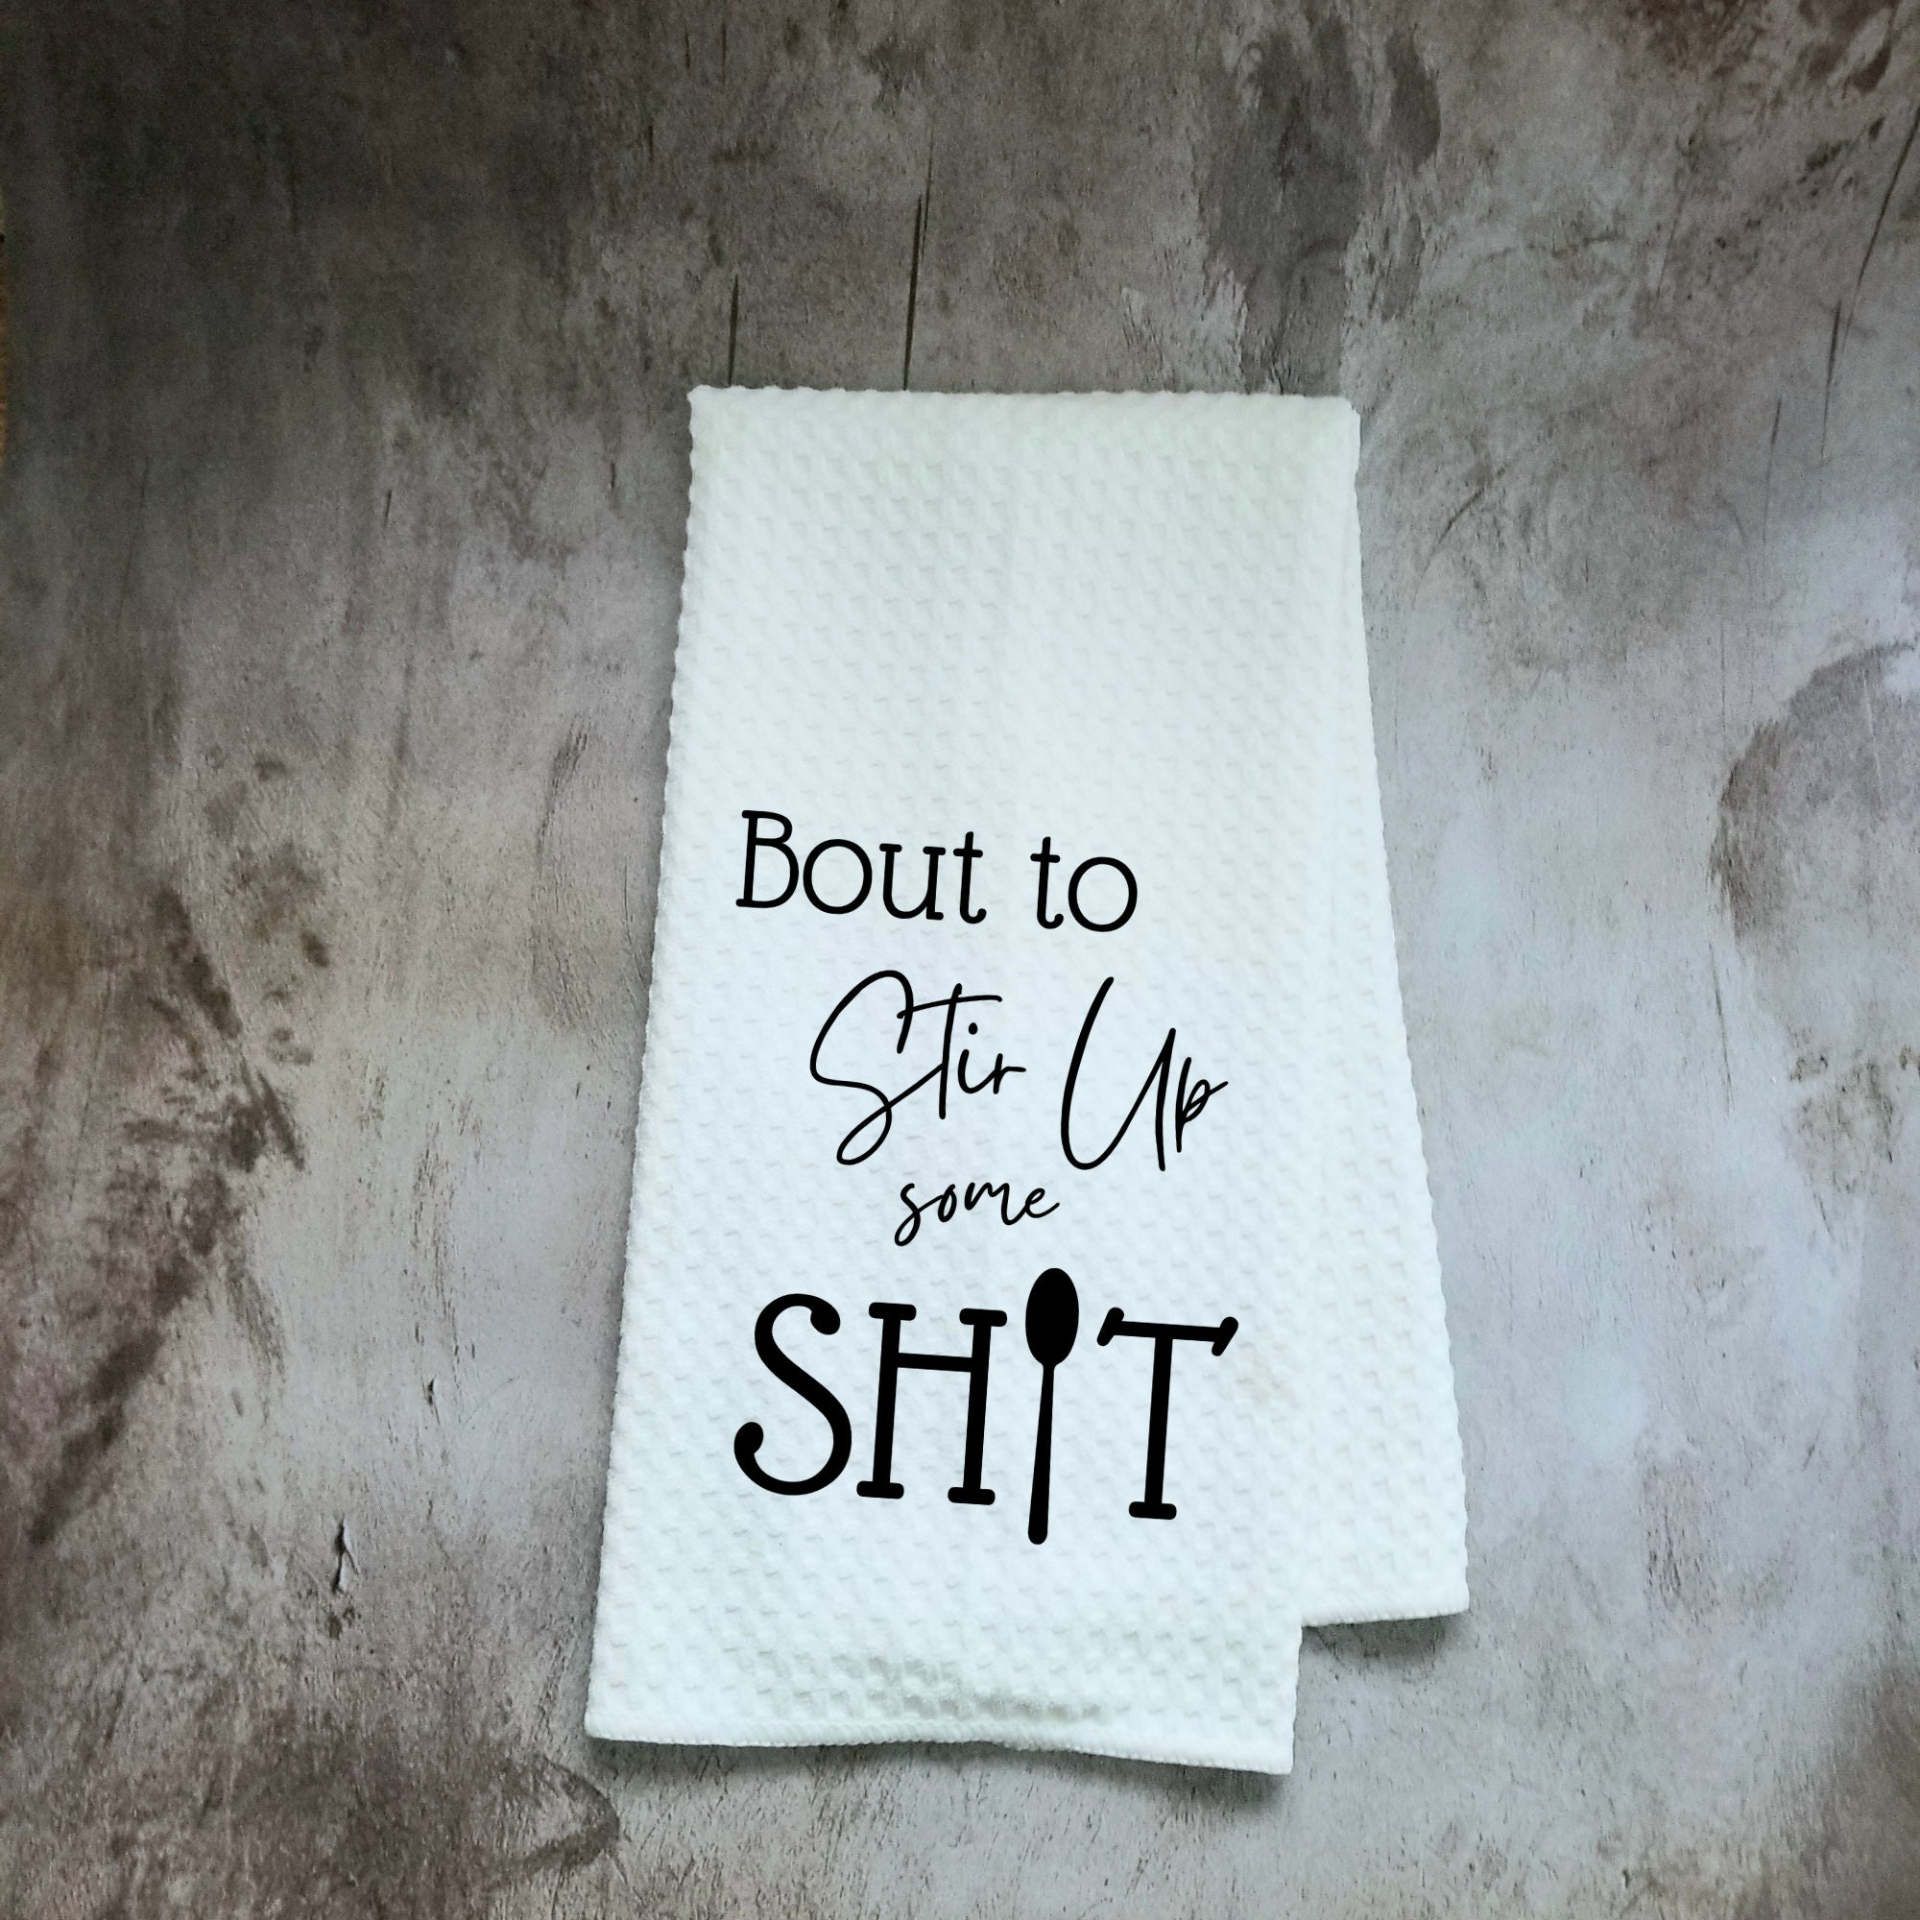 Bout to Stir Up Some Shit Dish Towel | Funny Kitchen Towel with Sarcastic Quote | Decorative Hand Towel for Cook Hostess Gift, Goodies N Stuff